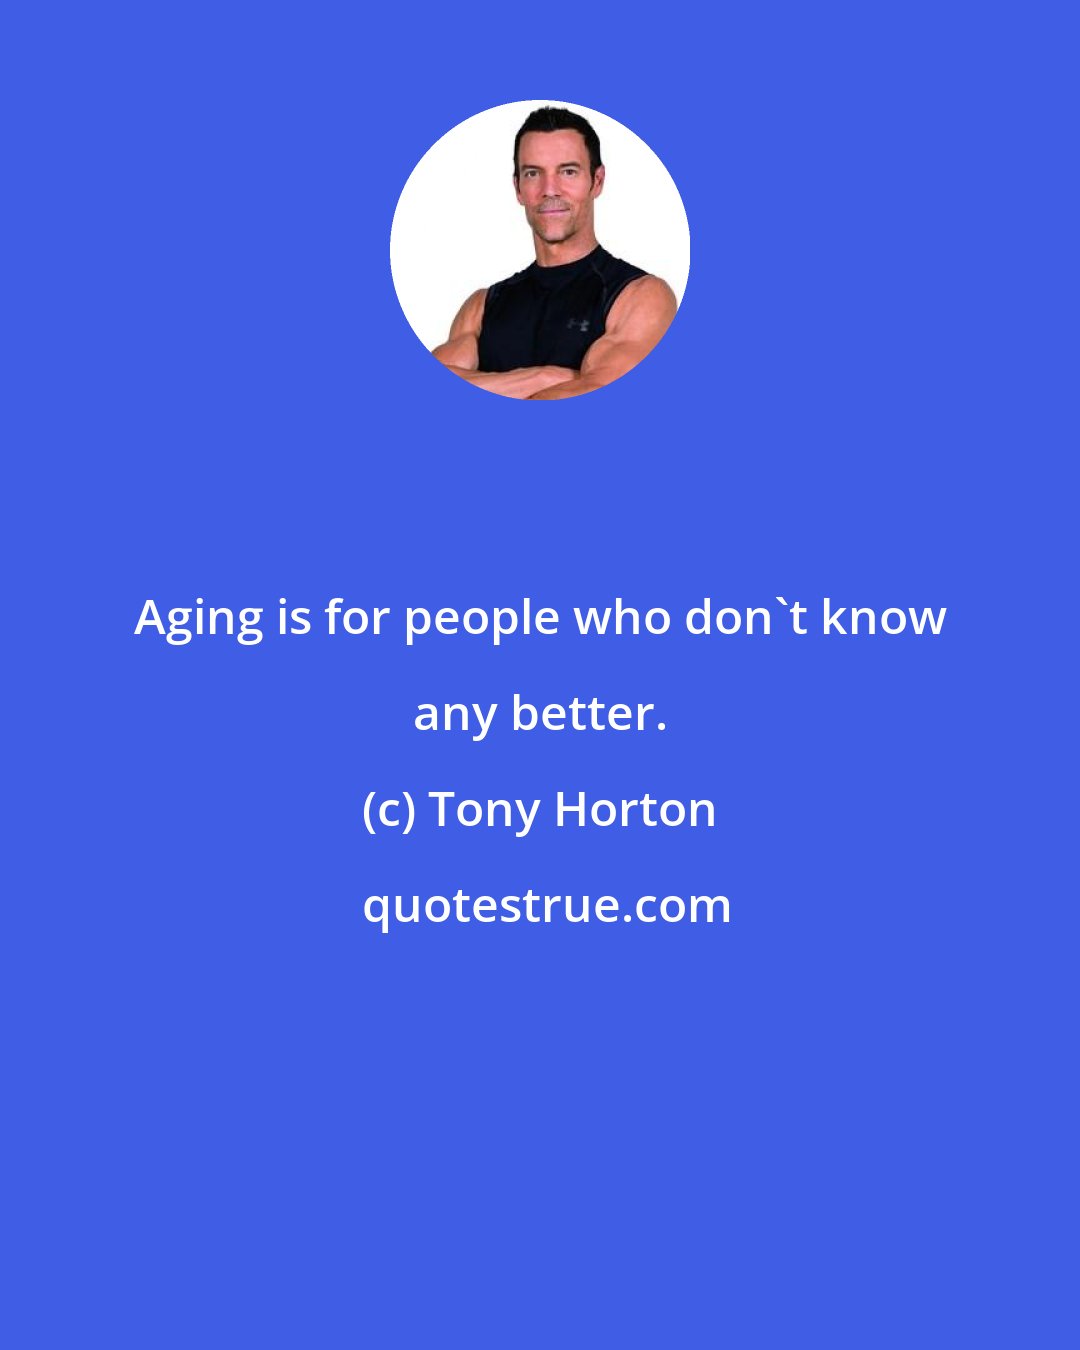 Tony Horton: Aging is for people who don't know any better.